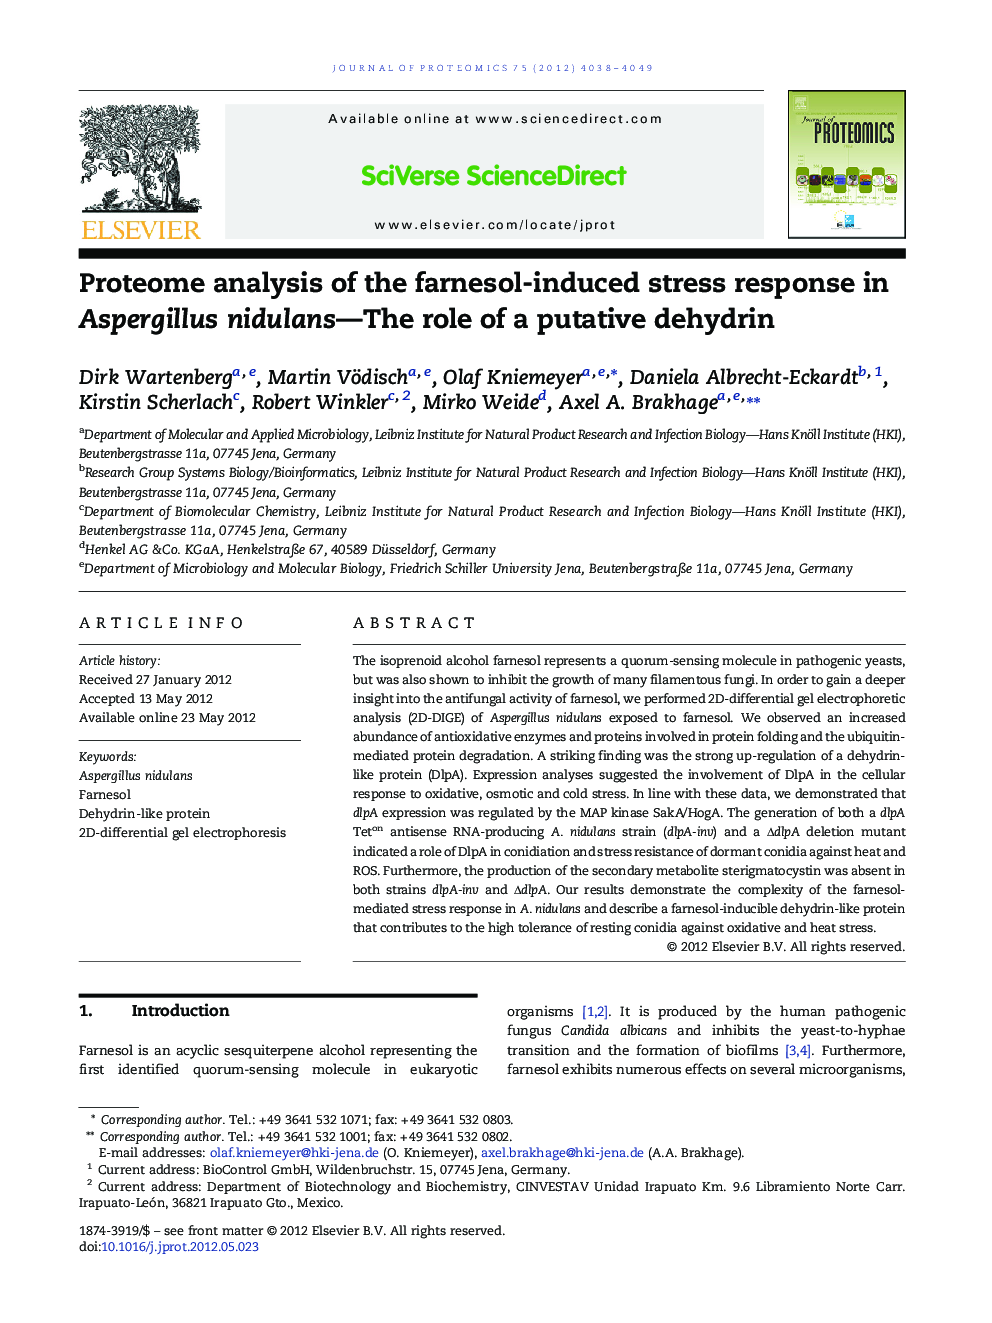 Proteome analysis of the farnesol-induced stress response in Aspergillus nidulans—The role of a putative dehydrin